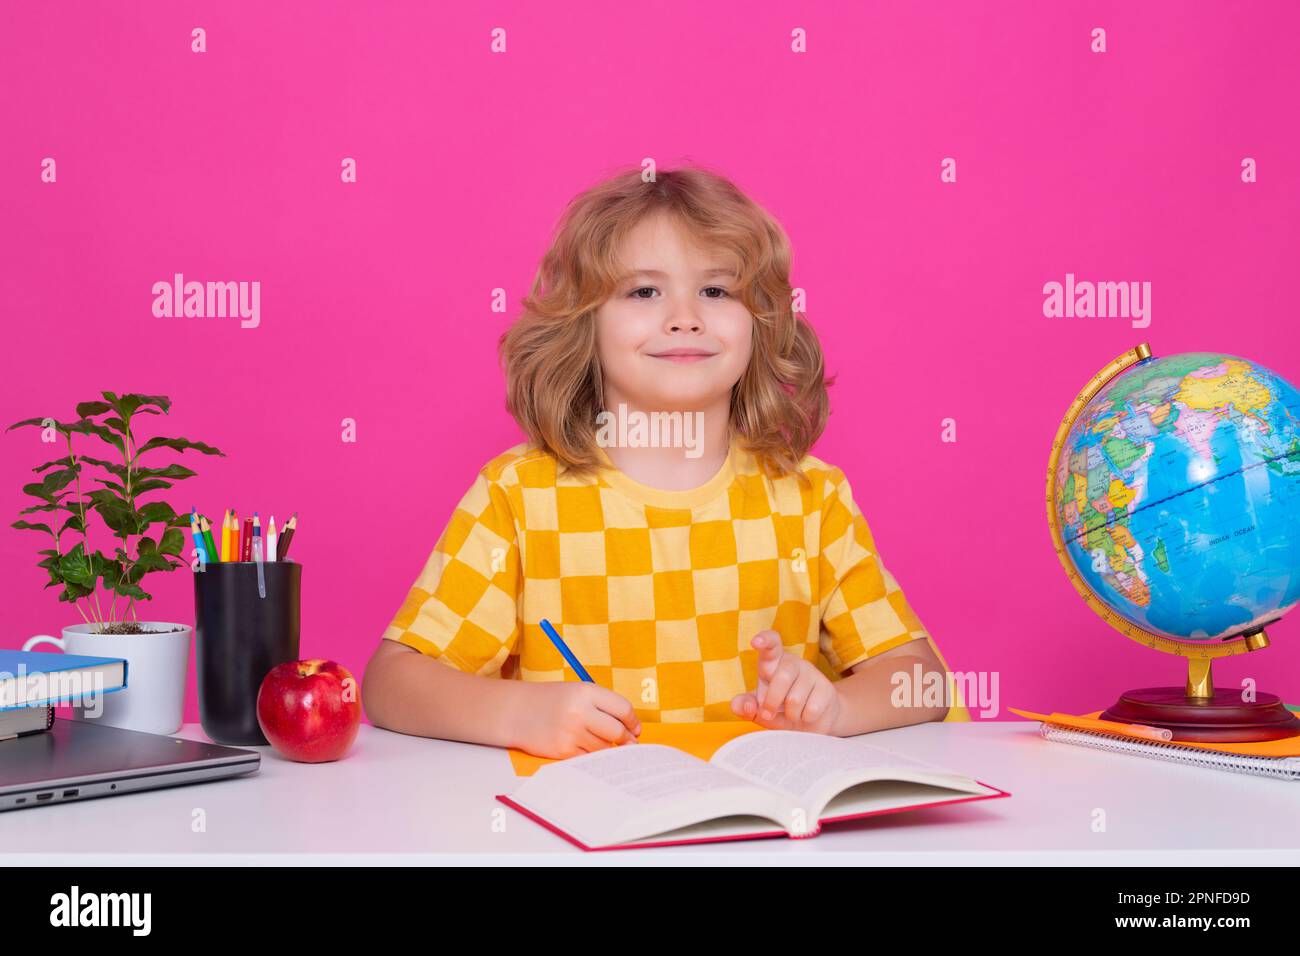 School and kids. Cute blonde child with a book learning. Knowledge day Stock Photo